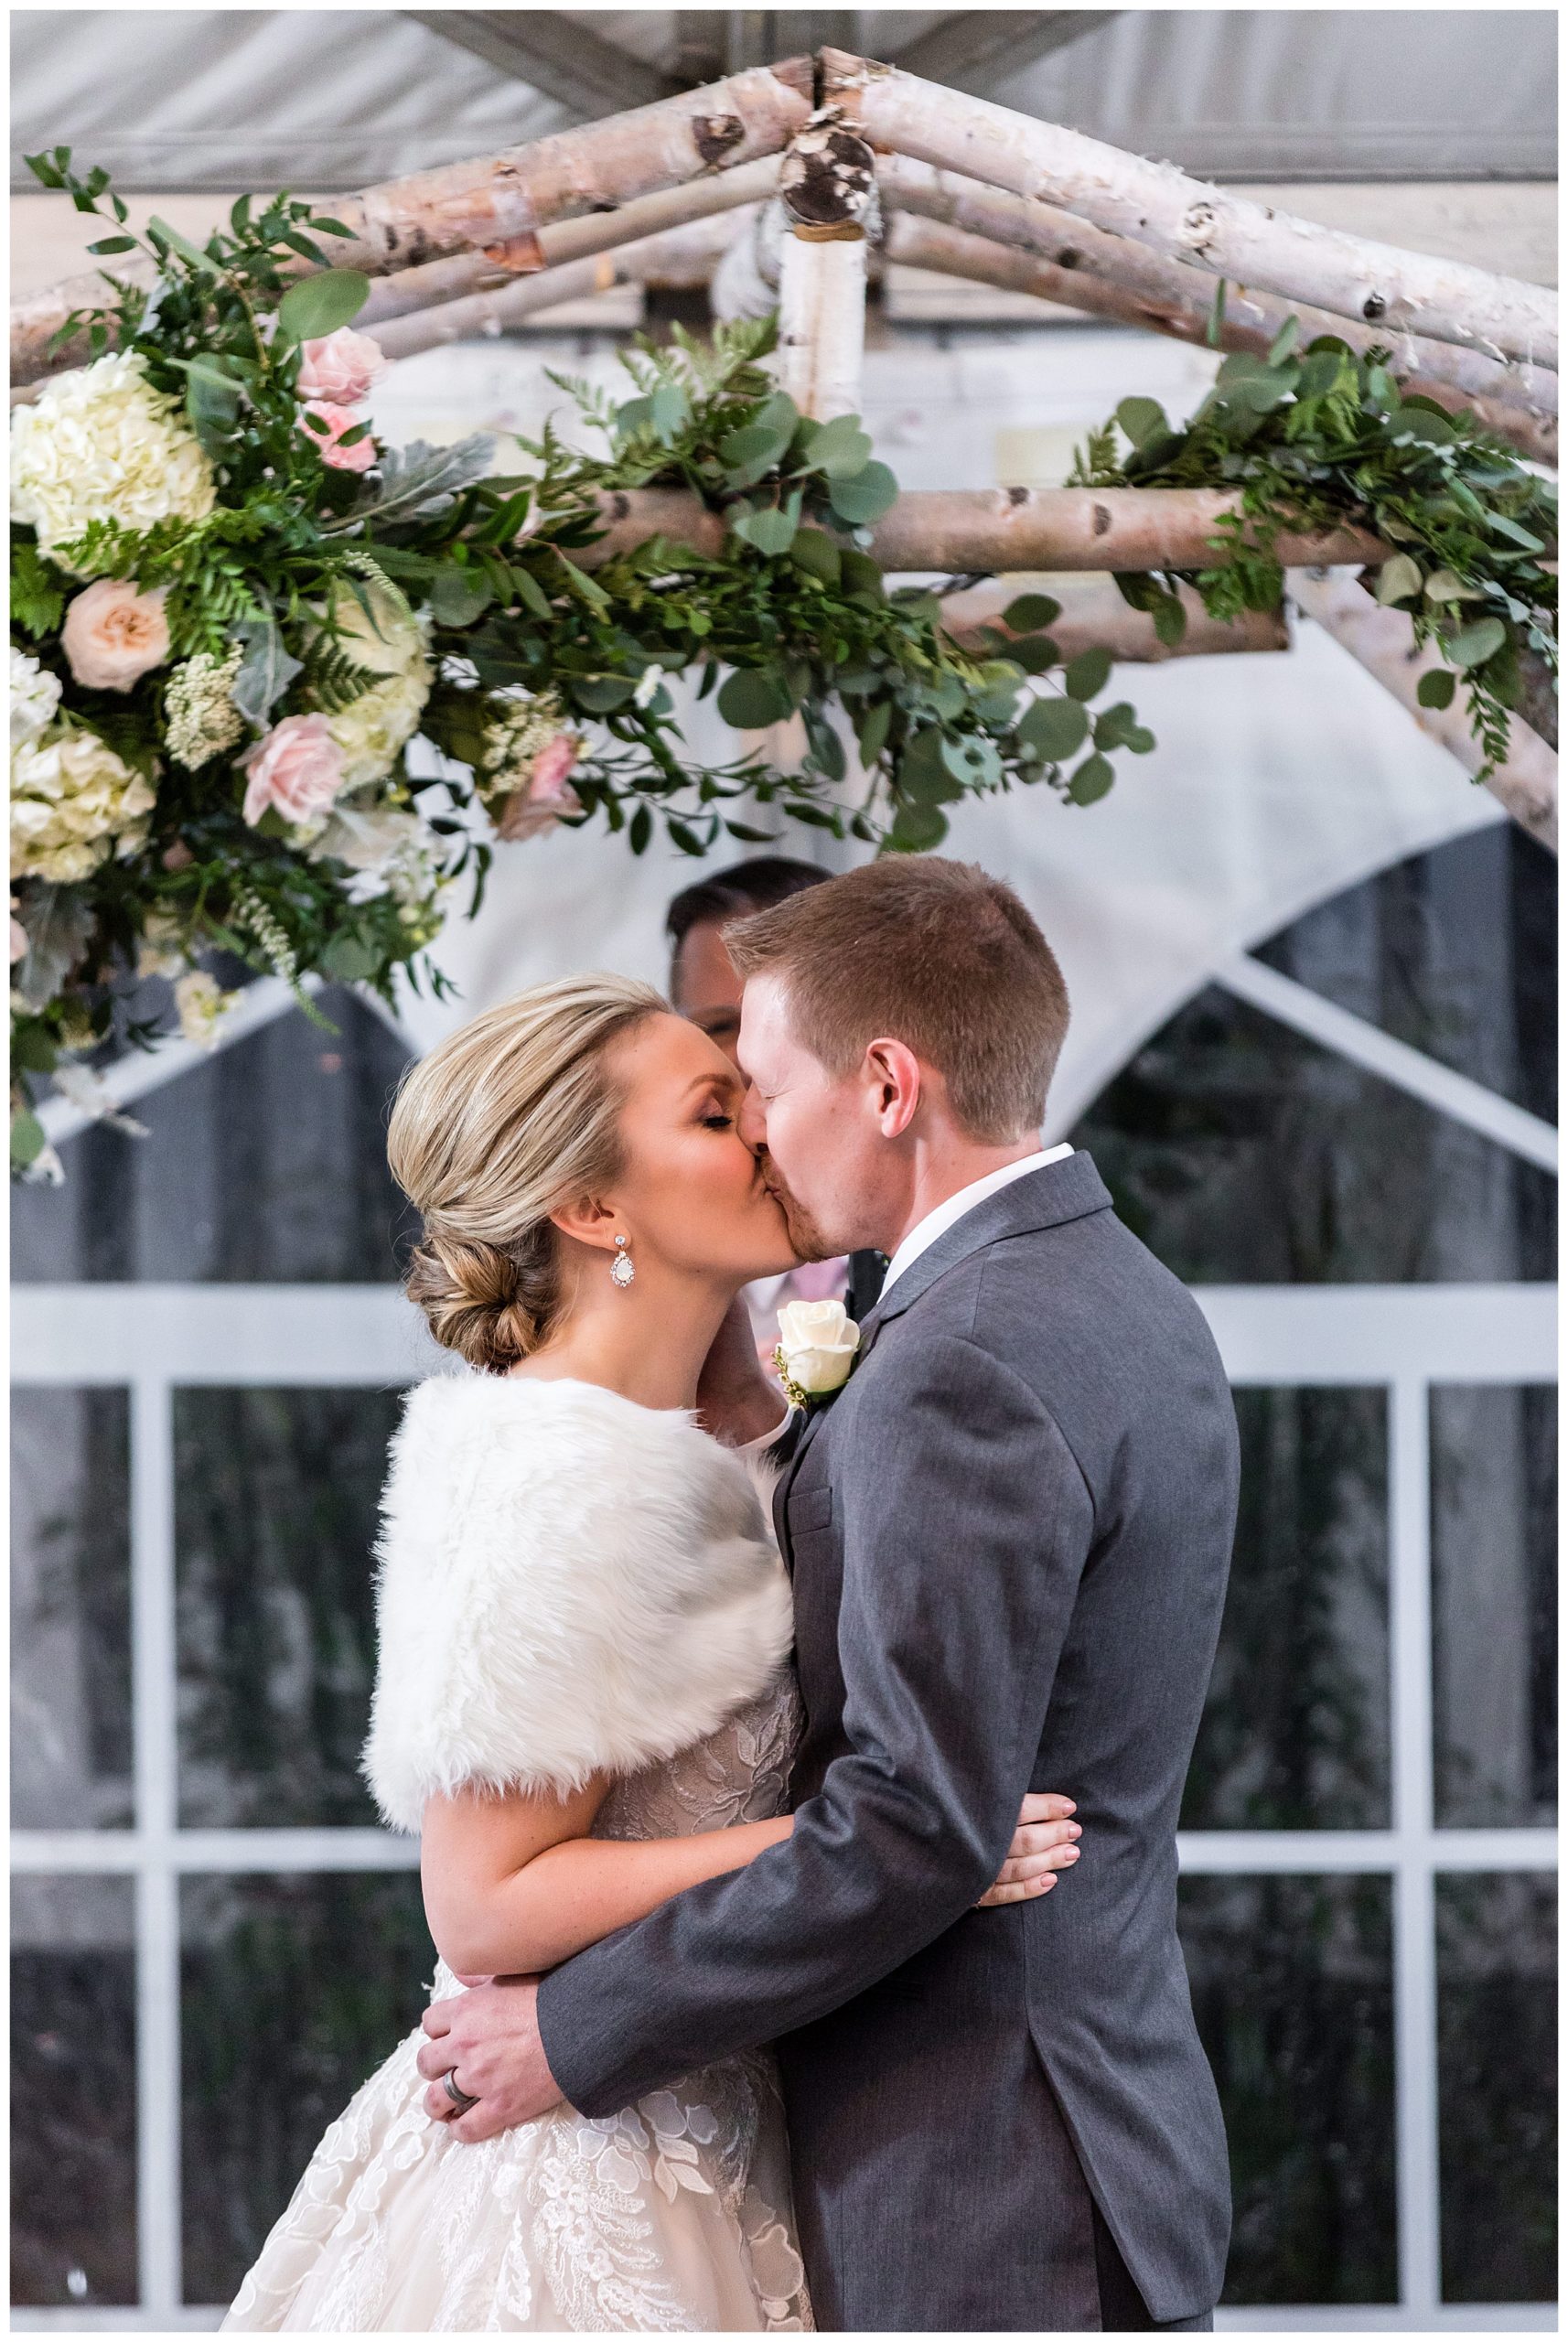 Bride and groom kiss at outdoor winter wedding ceremony at Barn on Bridge